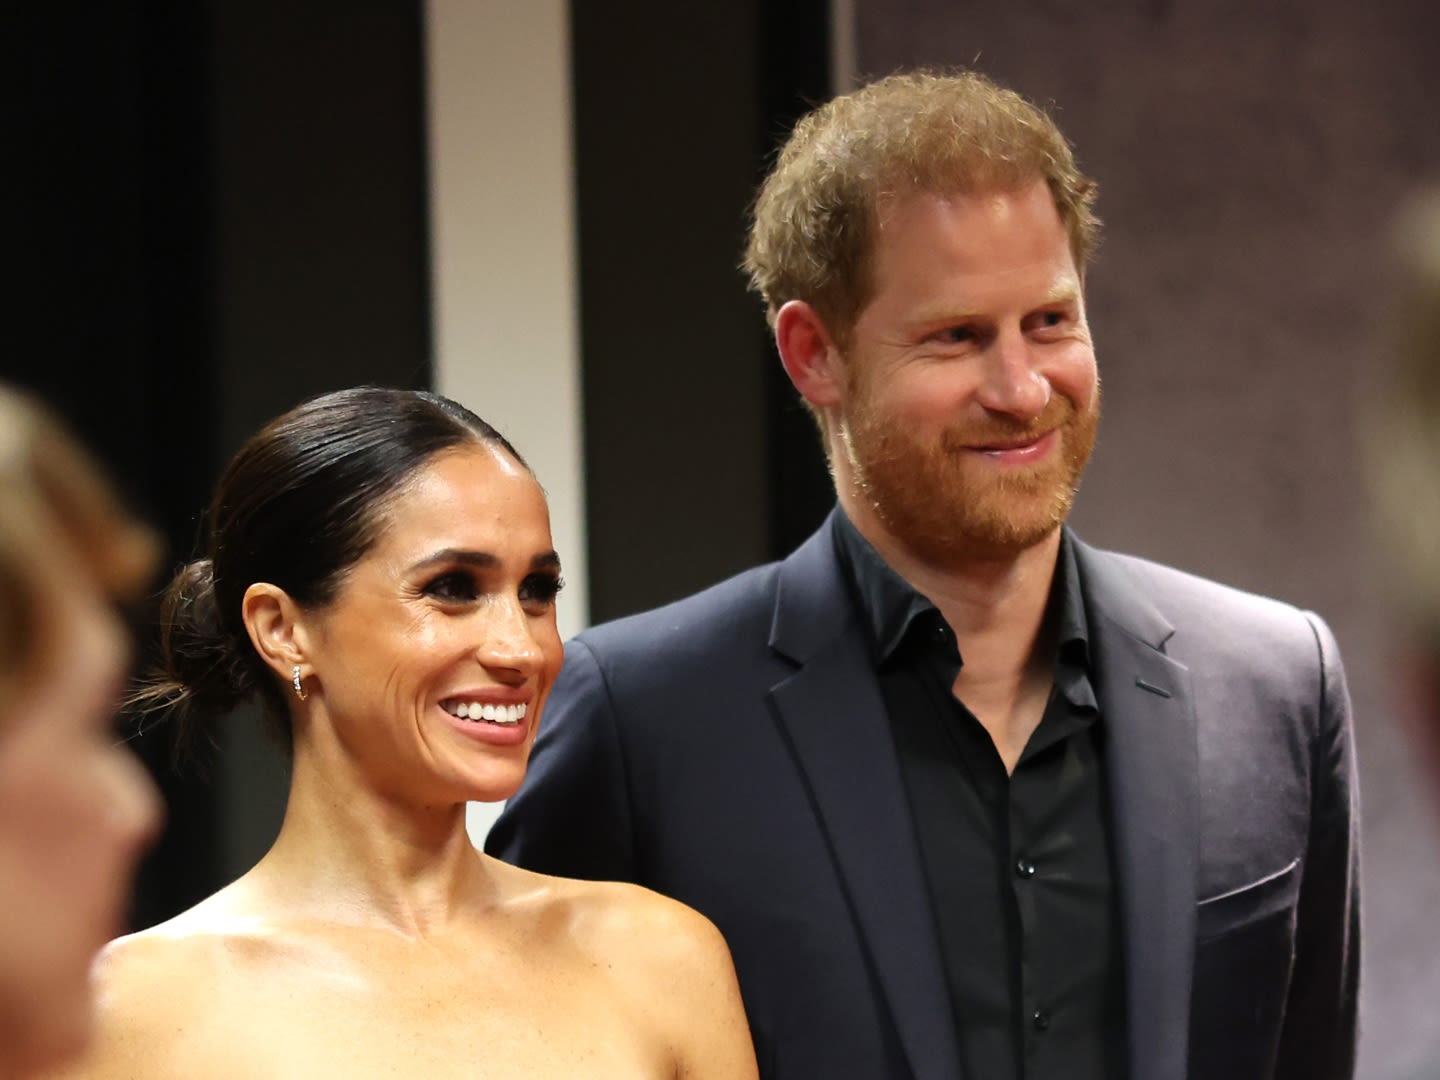 Prince Harry & Meghan Markle's Latest Hires Shows Just How Serious They Are About Their Rebrand